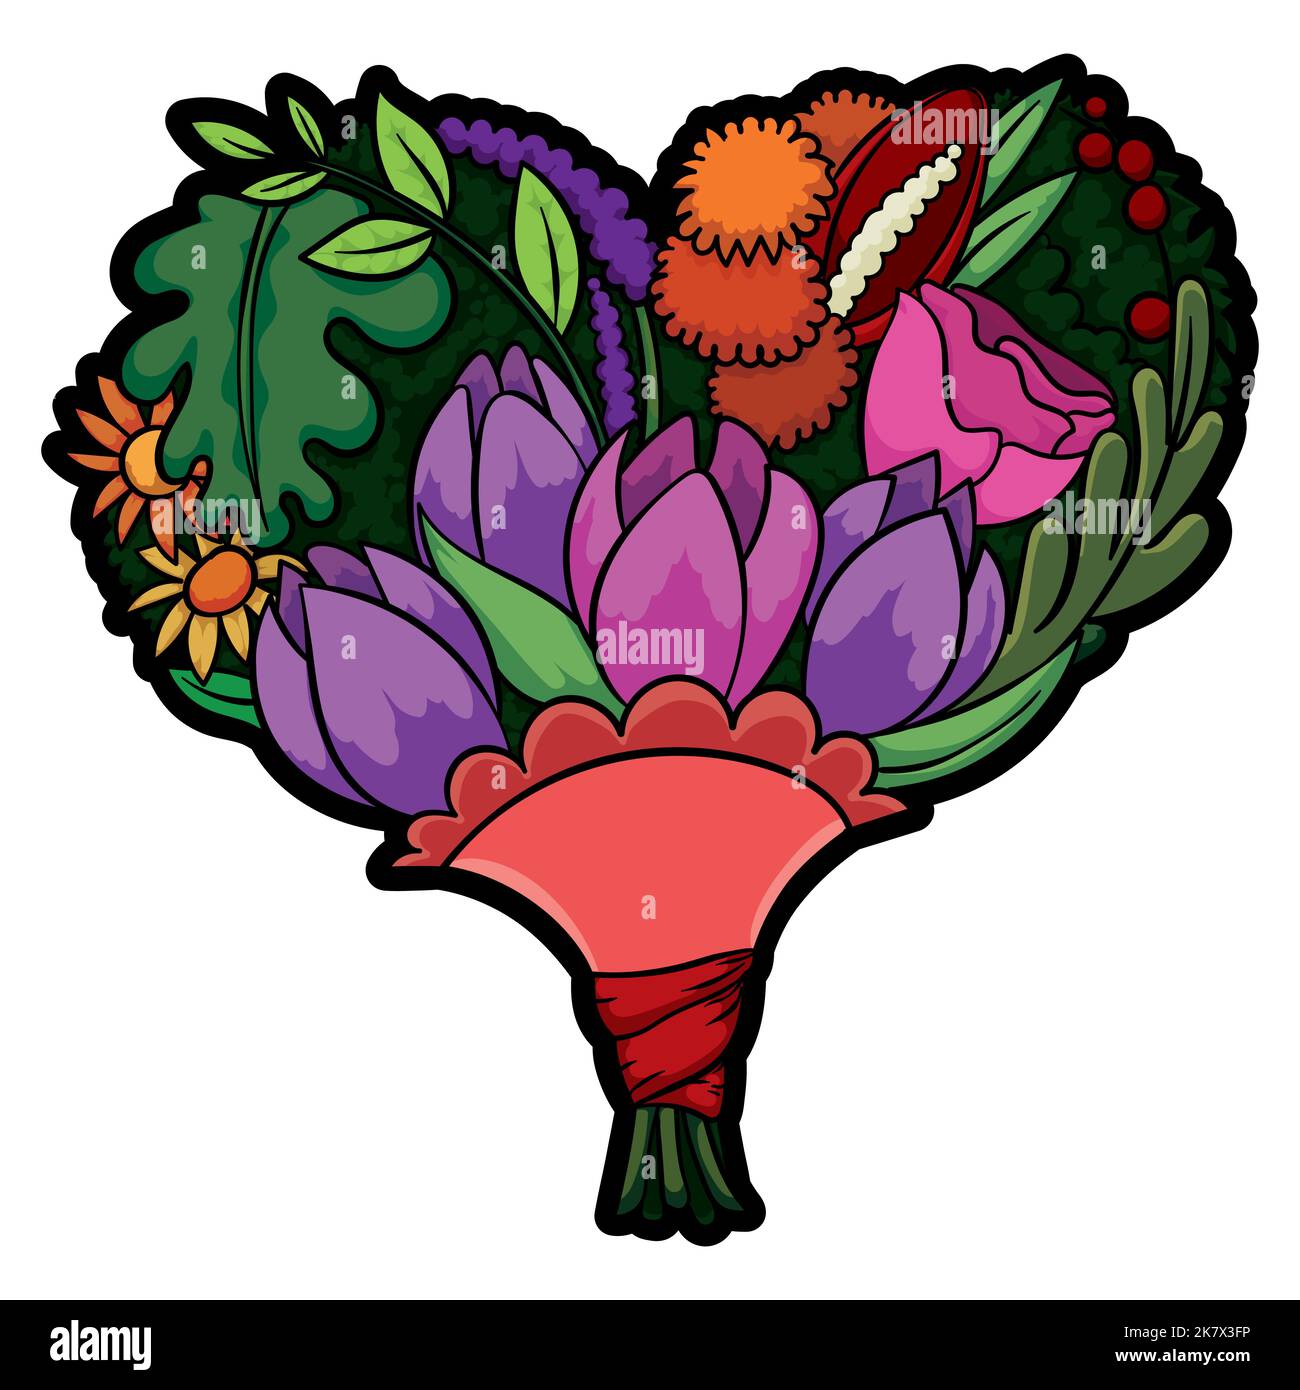 Heart shaped florid bouquet, decorated with tulips, rose, pom-poms dahlias, daisies, berries, calla lili, leaves and foliage. Stock Vector